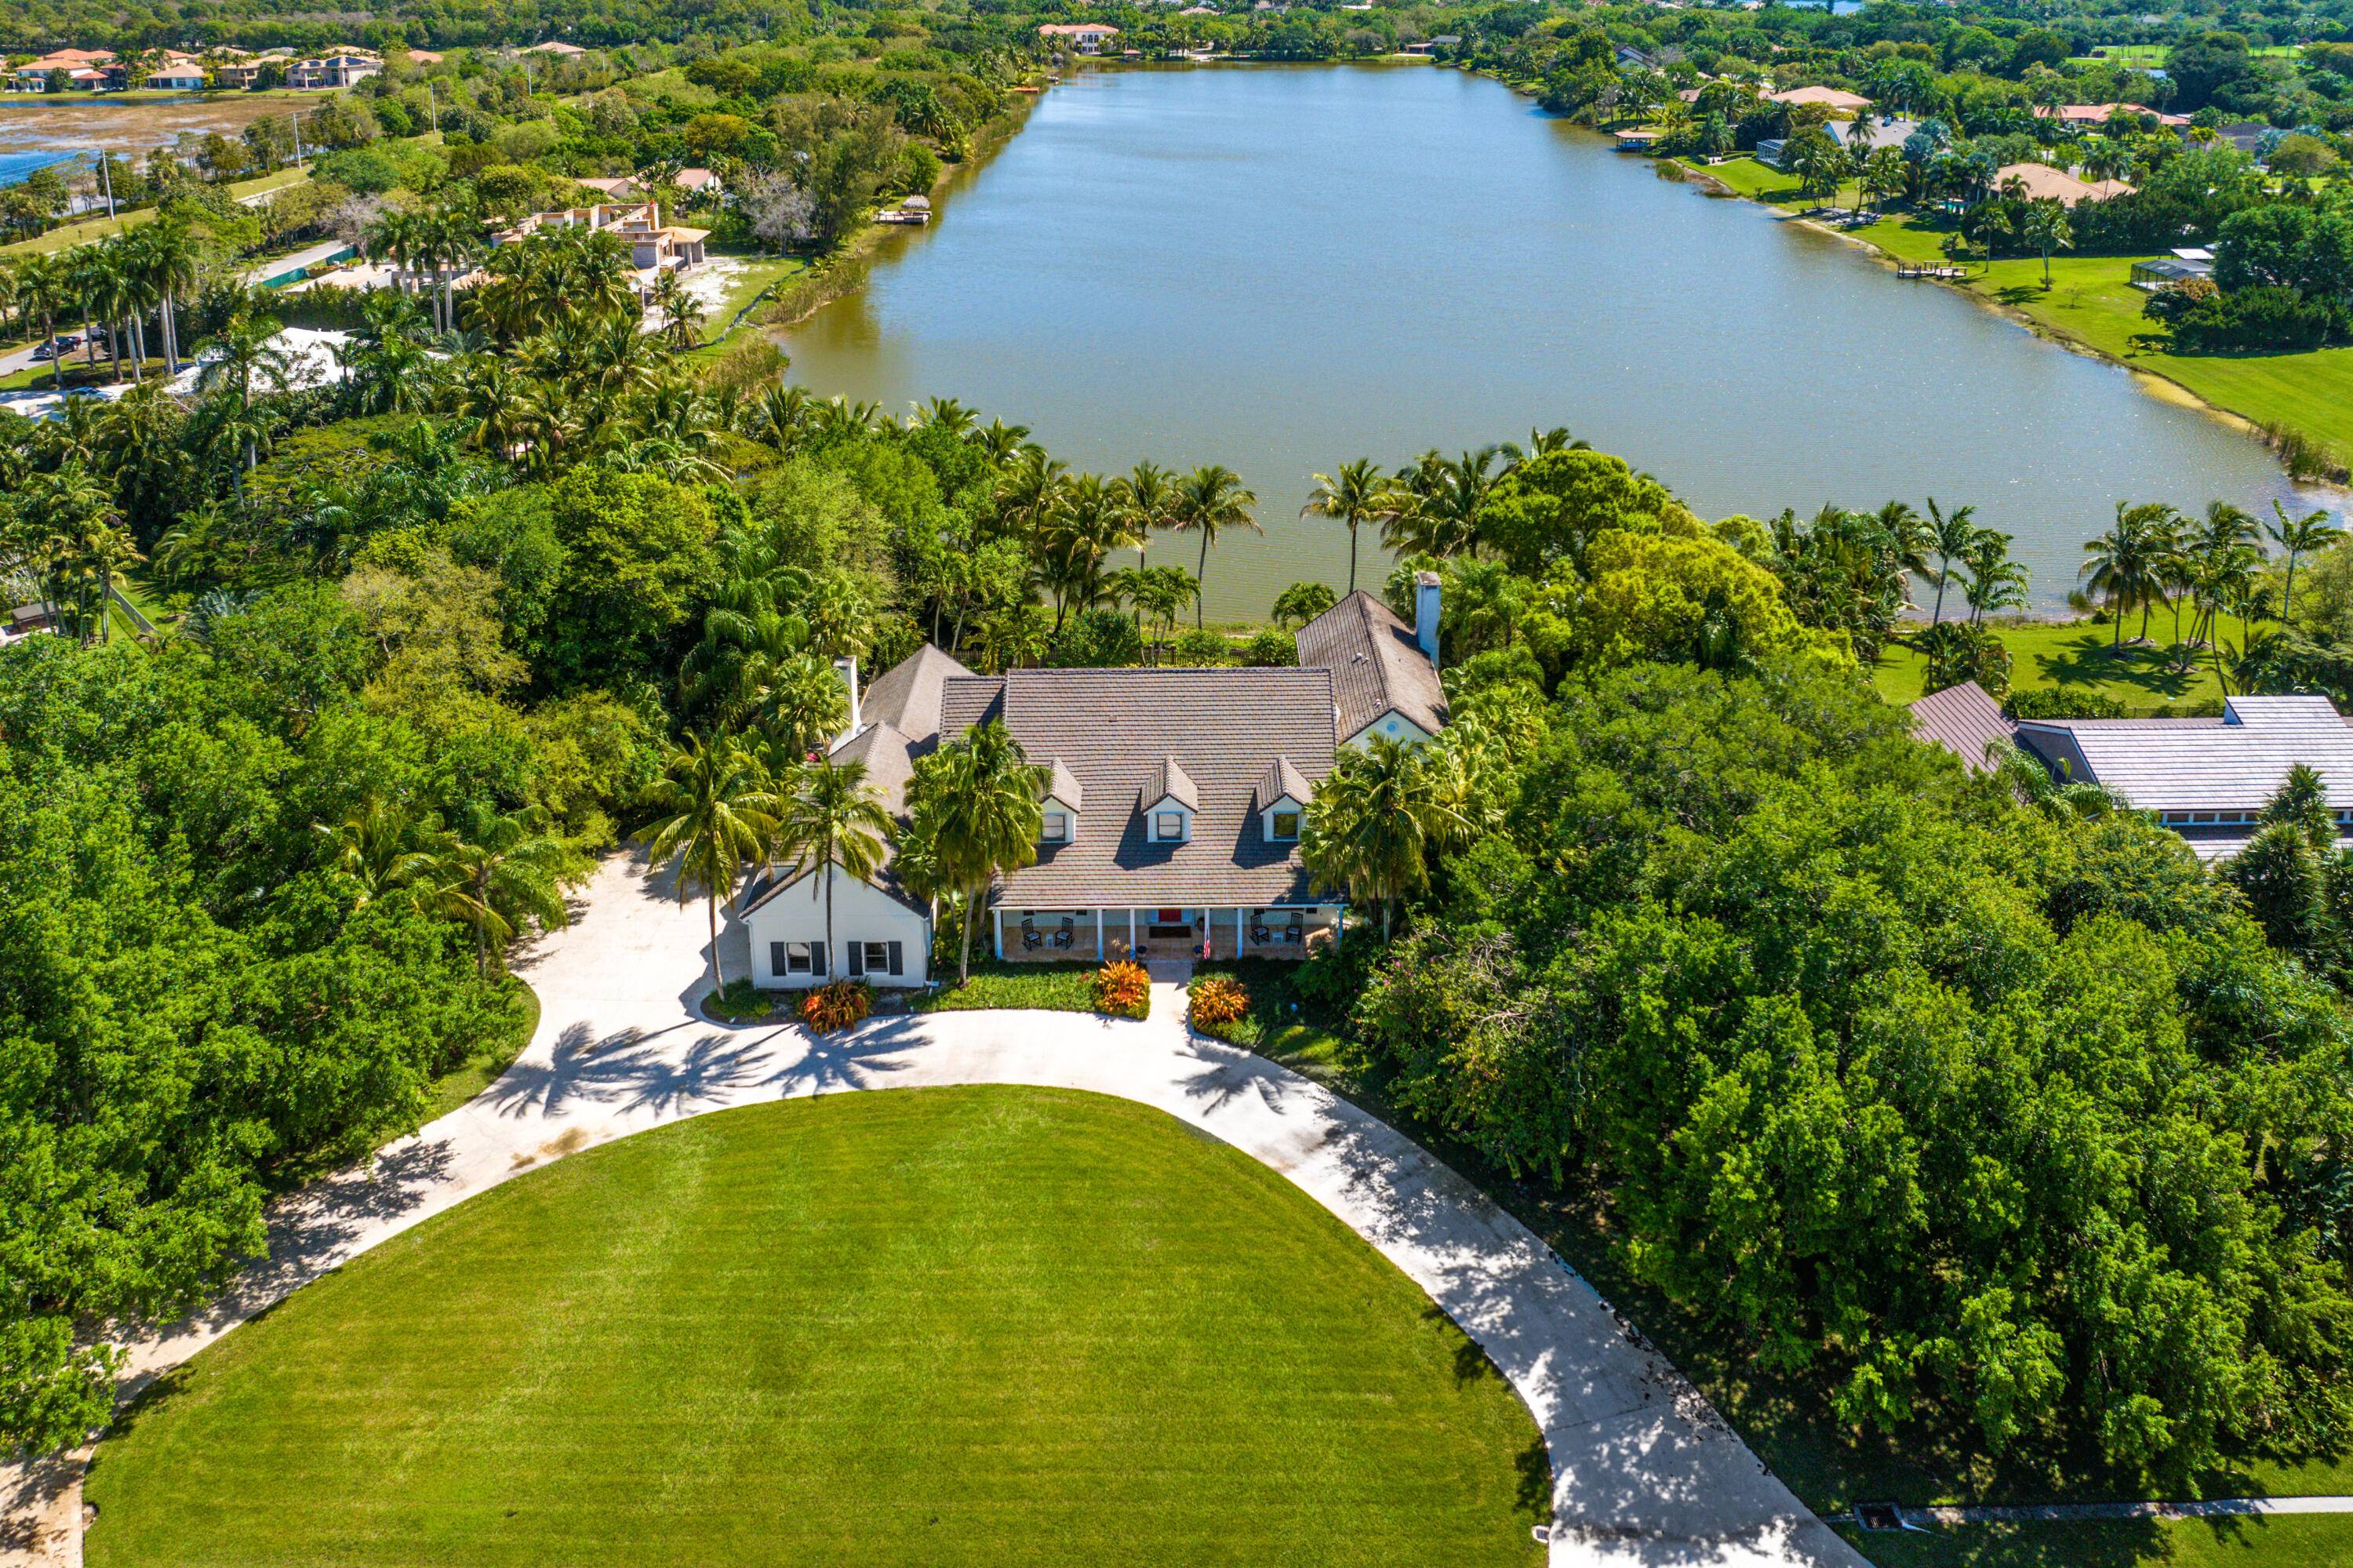 Built as a ''Forever Home'' on a gorgeous acre of lakefront property, this 6600 square foot, 7 bedroom oasis boasts a secluded paradise for the entire family to enjoy.